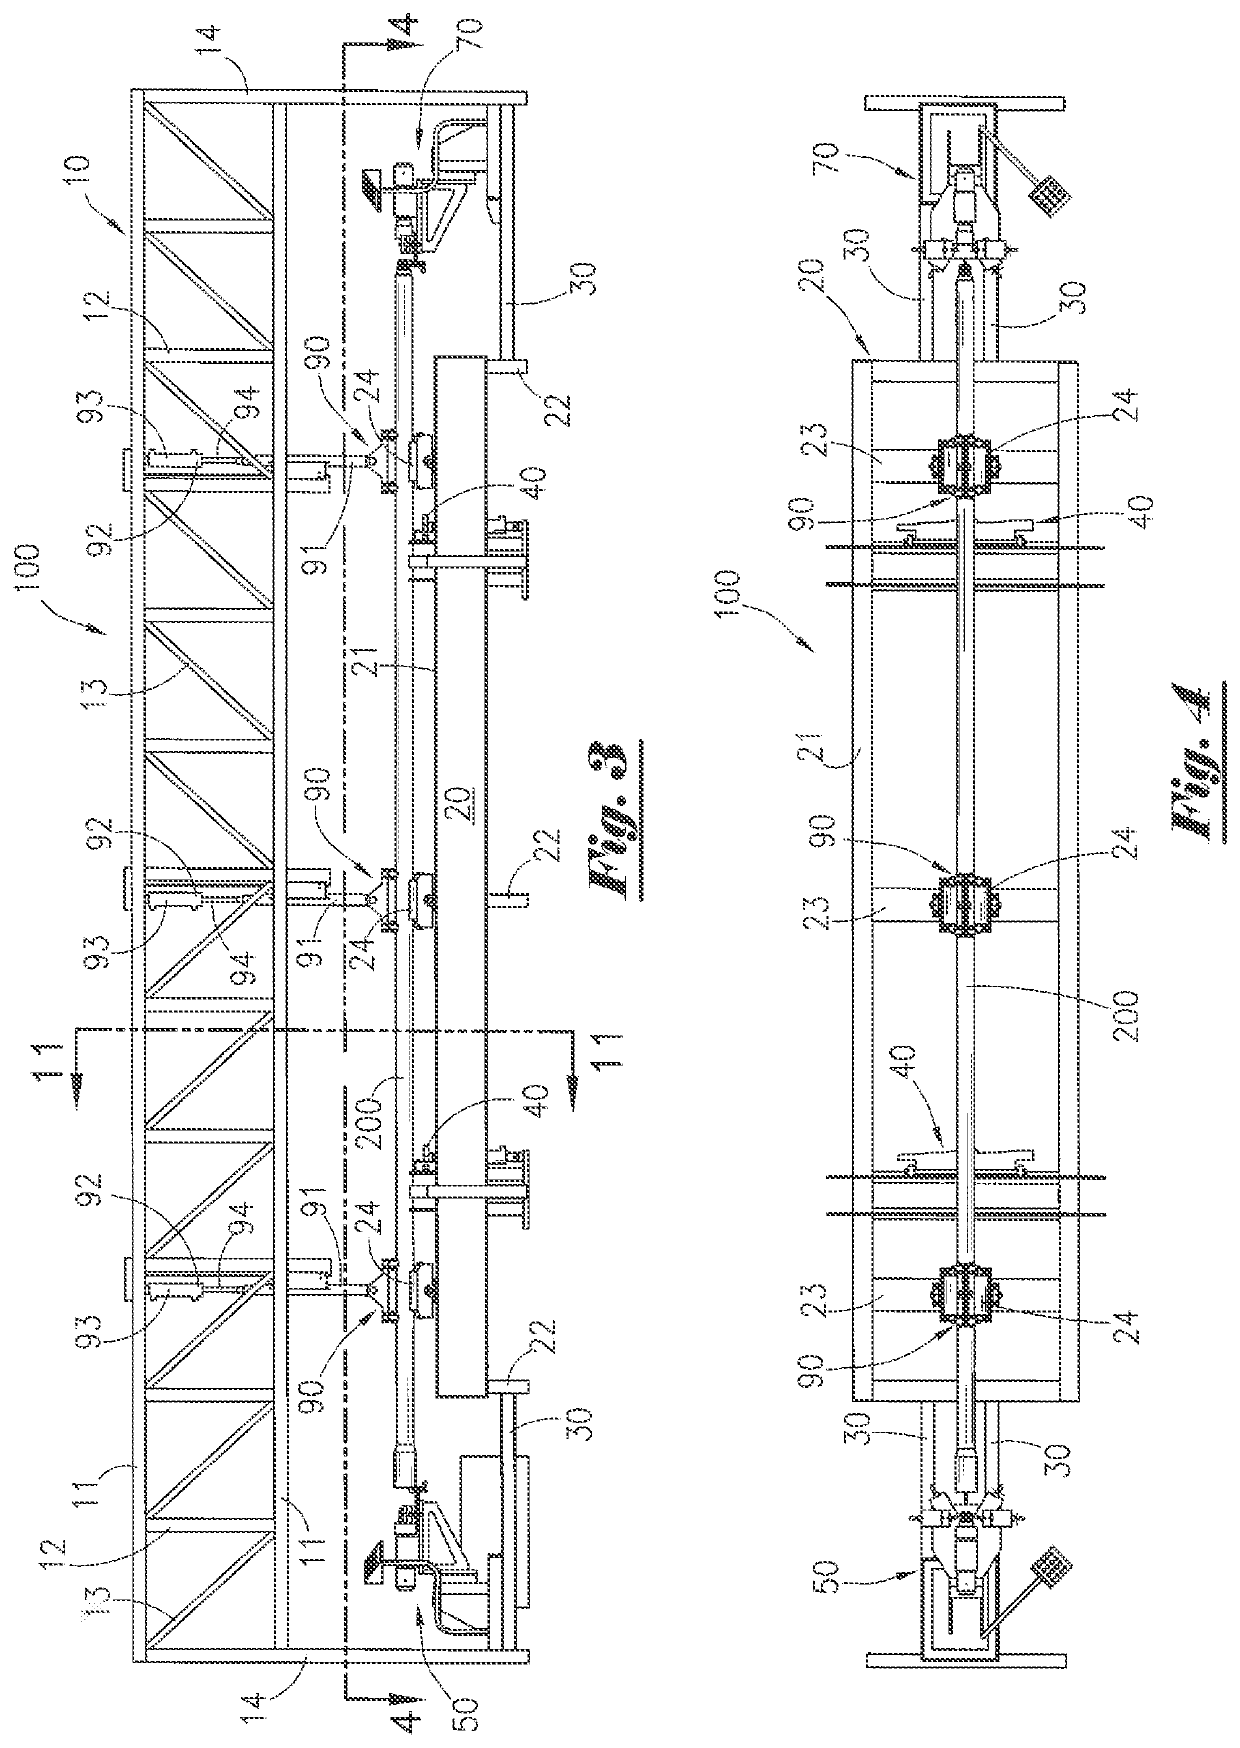 Method and apparatus for repair drill pipe and other tubular goods, including threaded connections thereof